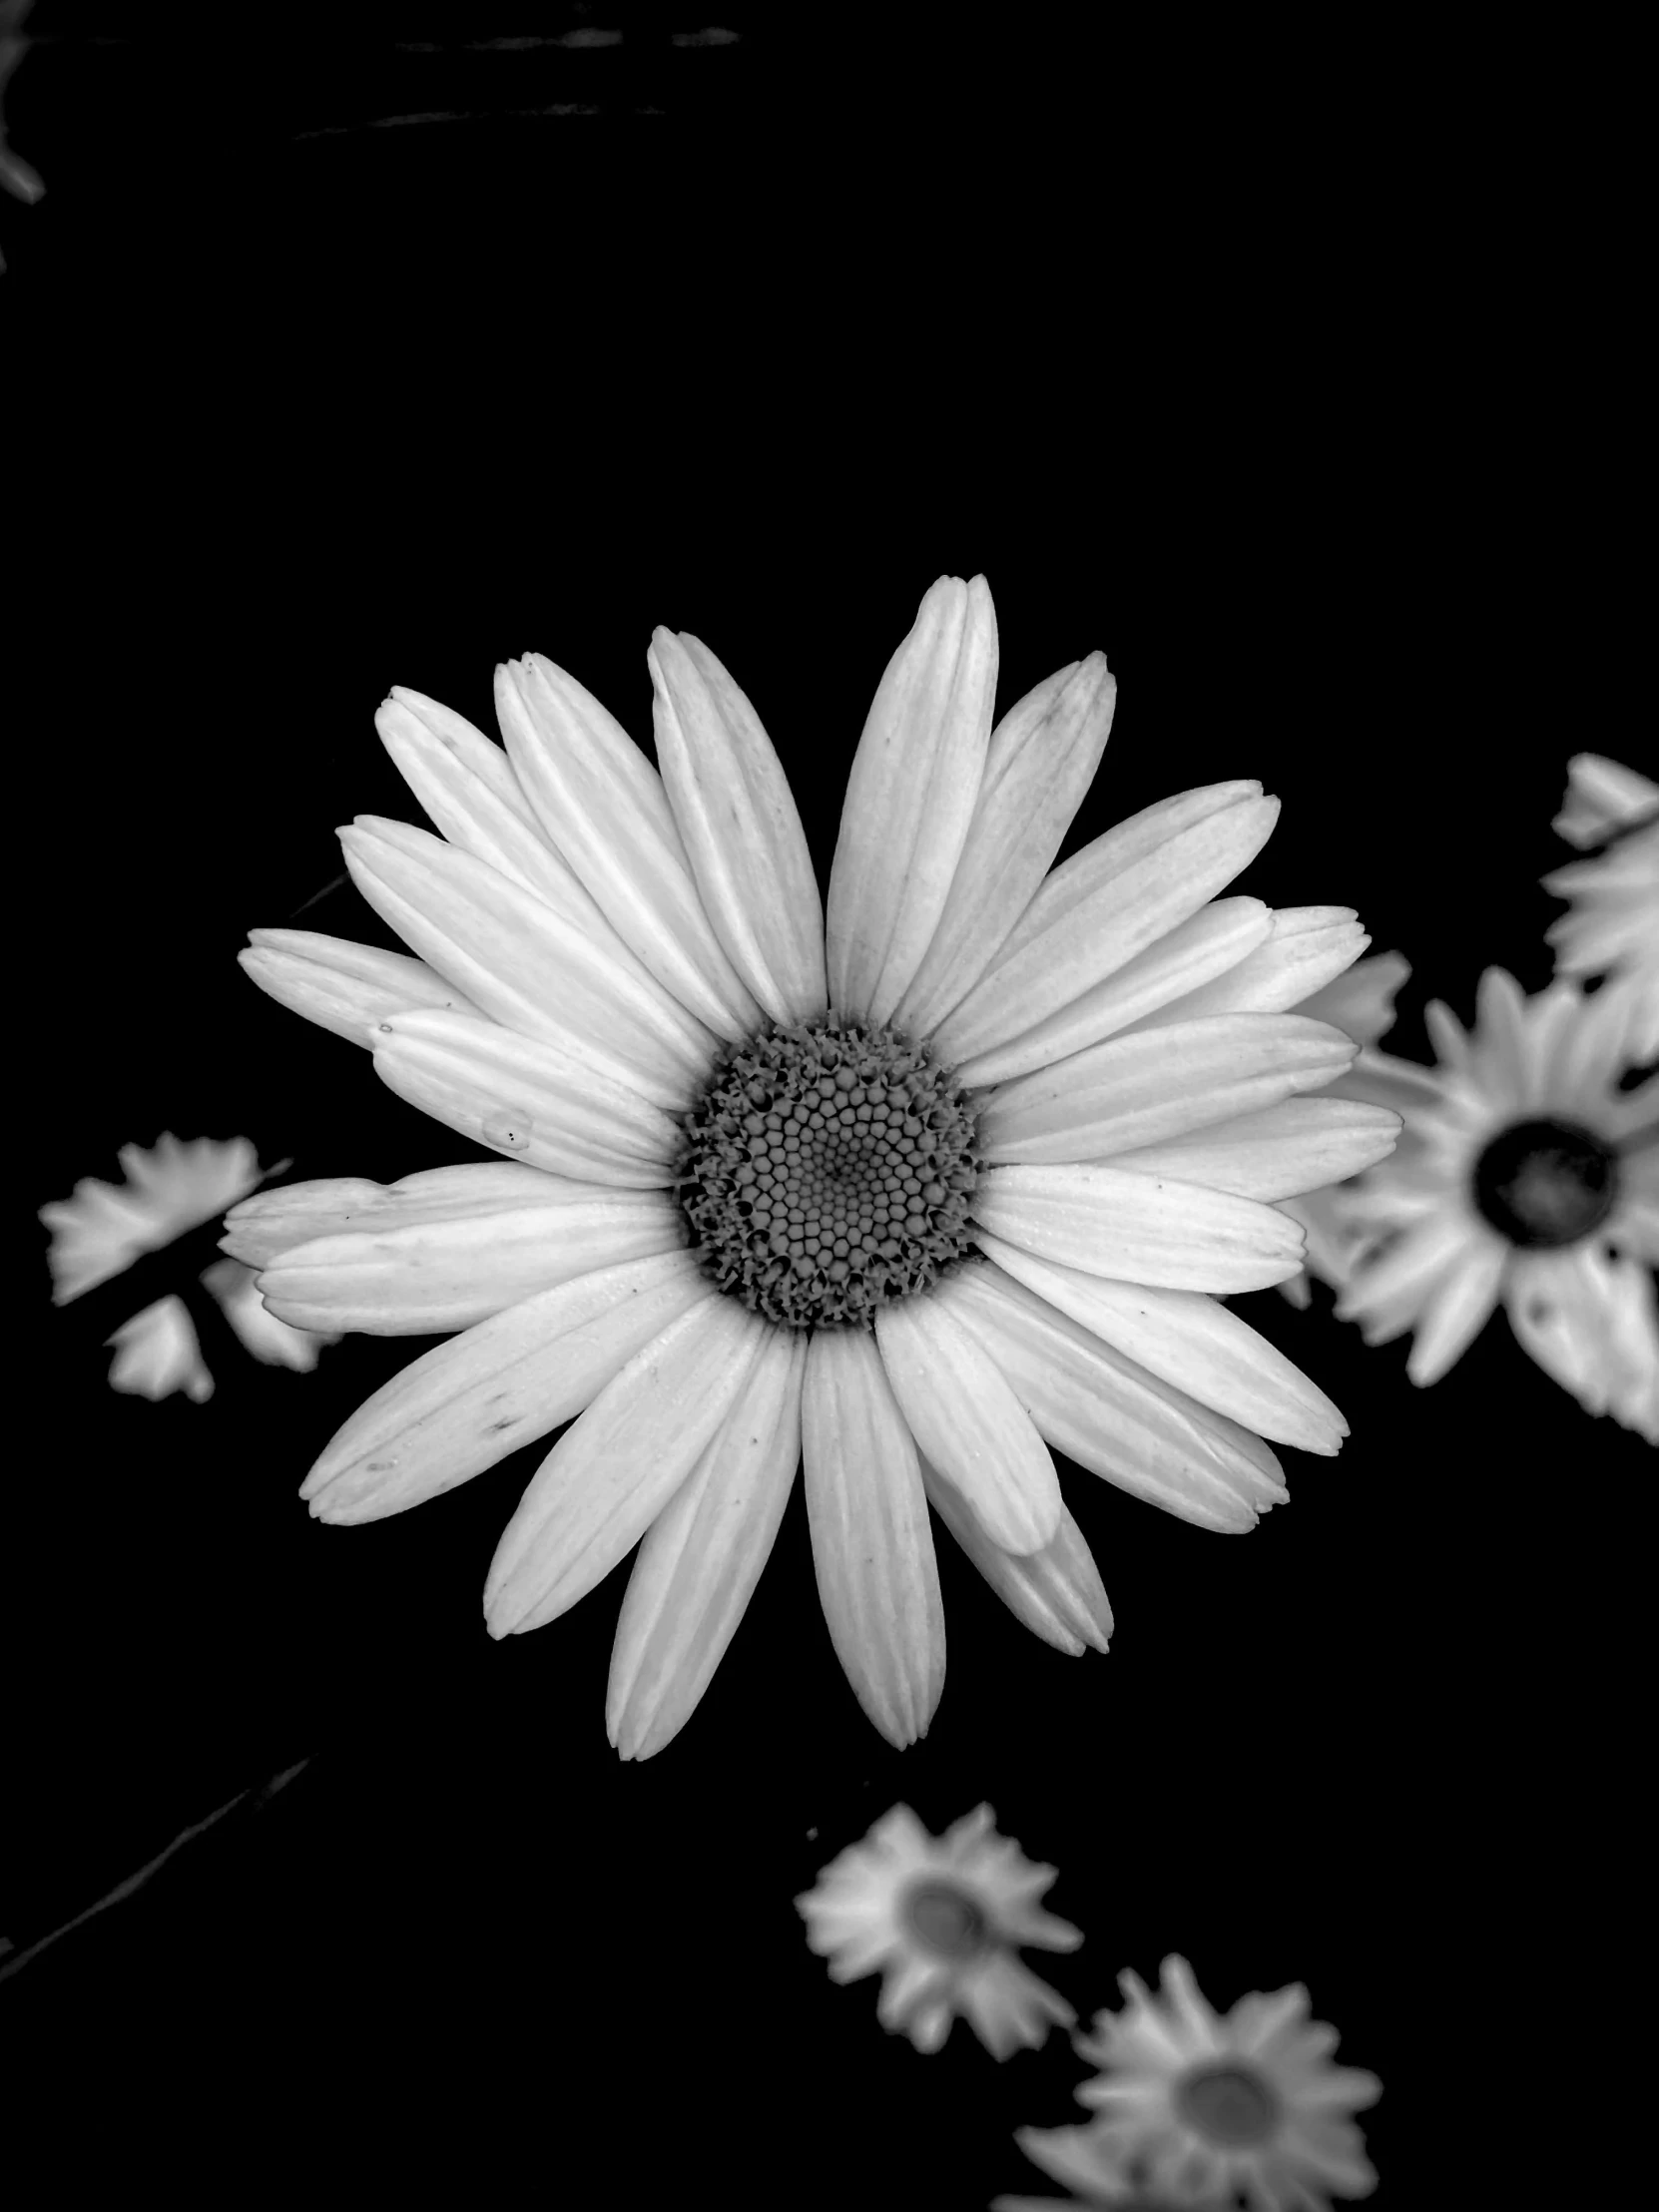 black and white pograph of daisies with space for text